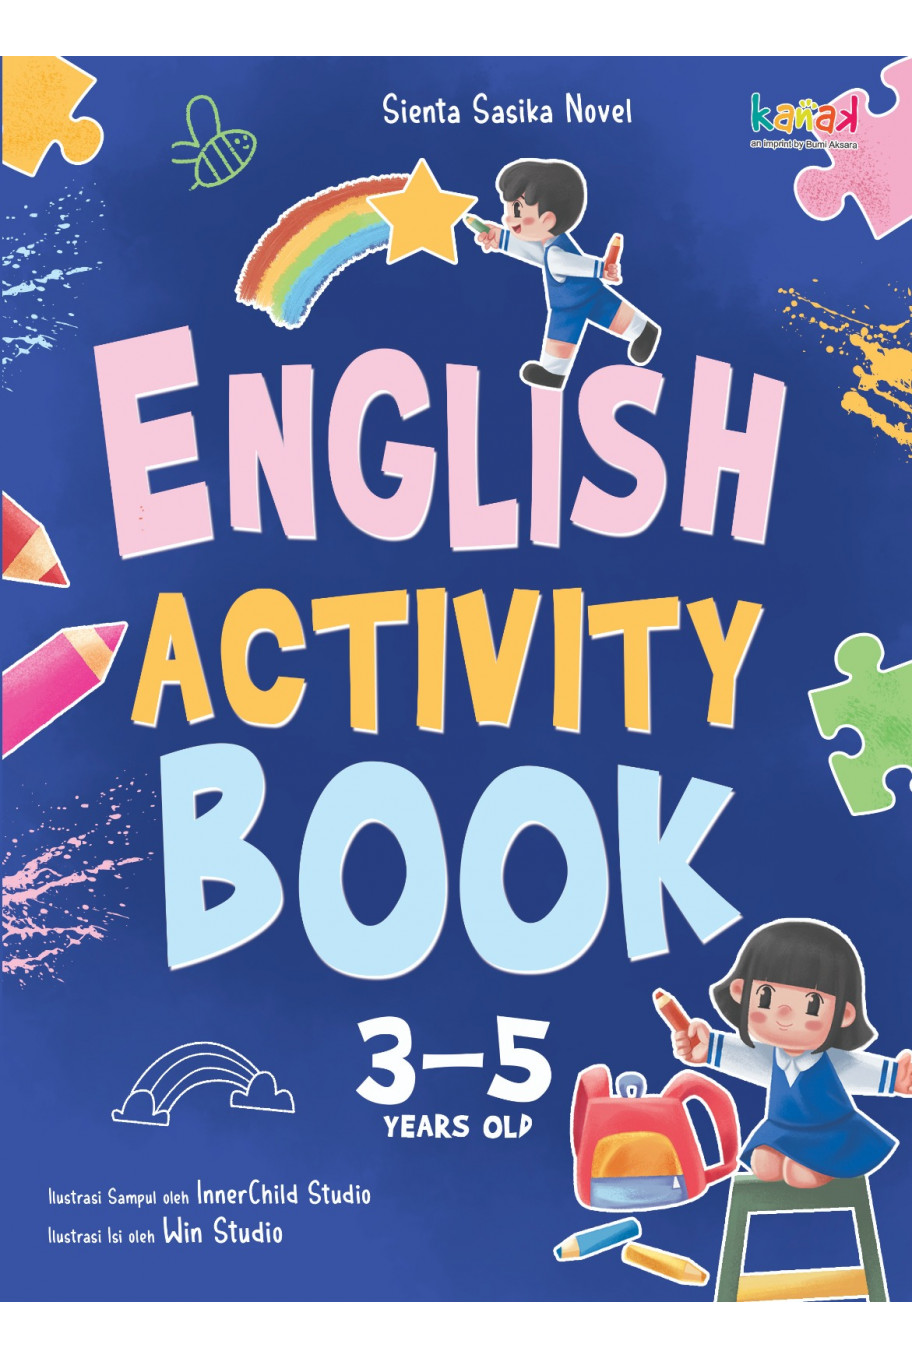 English Activity Book 3-5 Years Old